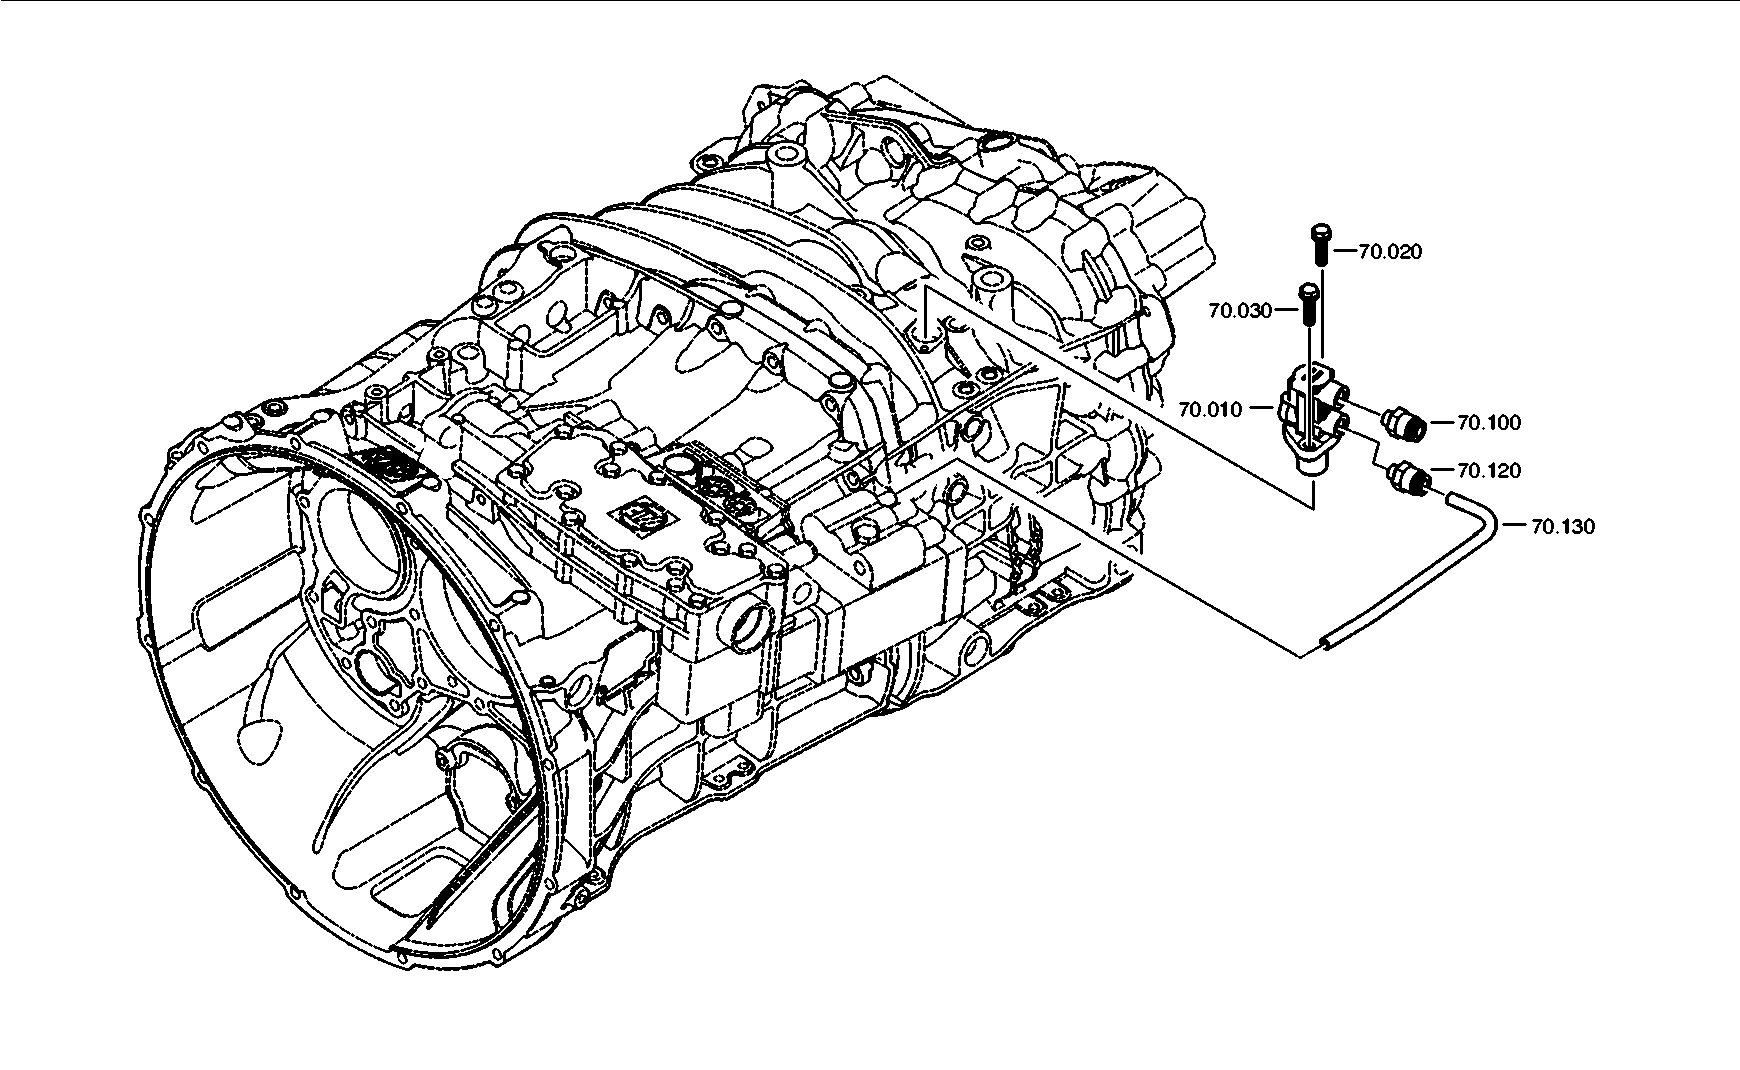 drawing for DAF 1899818 - PLUG-IN COUPLING (figure 1)